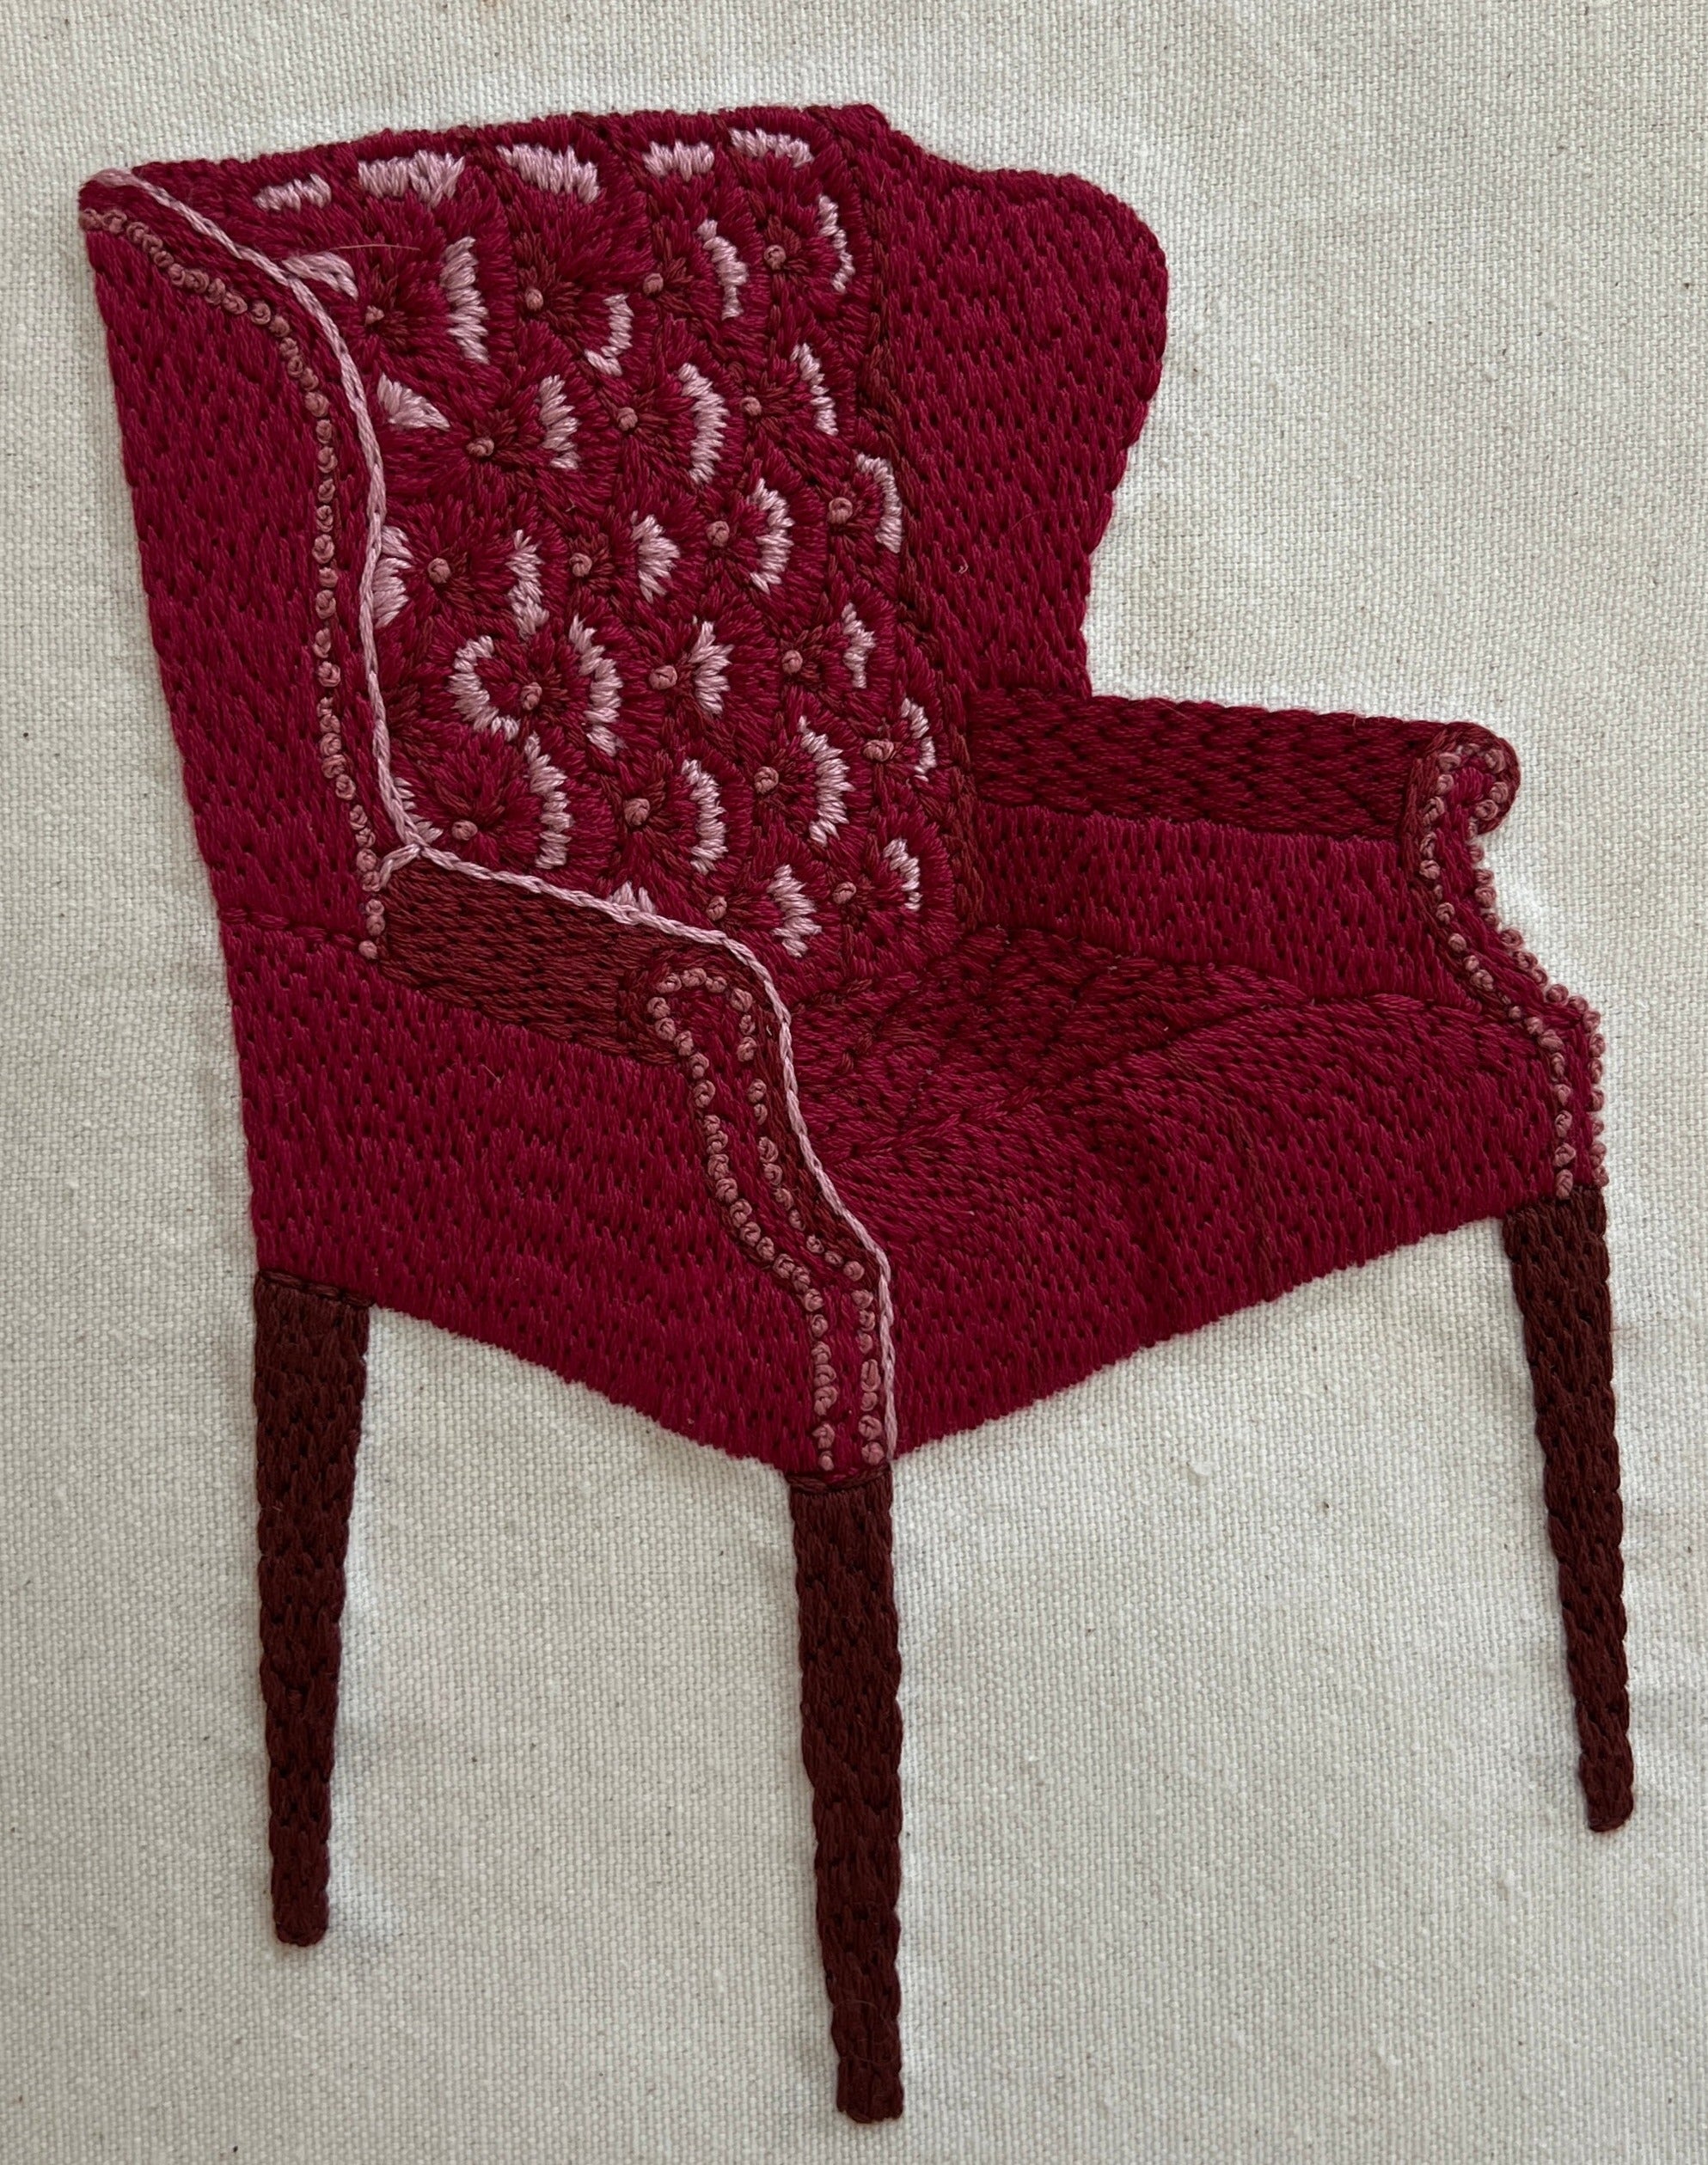 DEEP PURPLE CHAIR by Jane Reichle – thecathedral